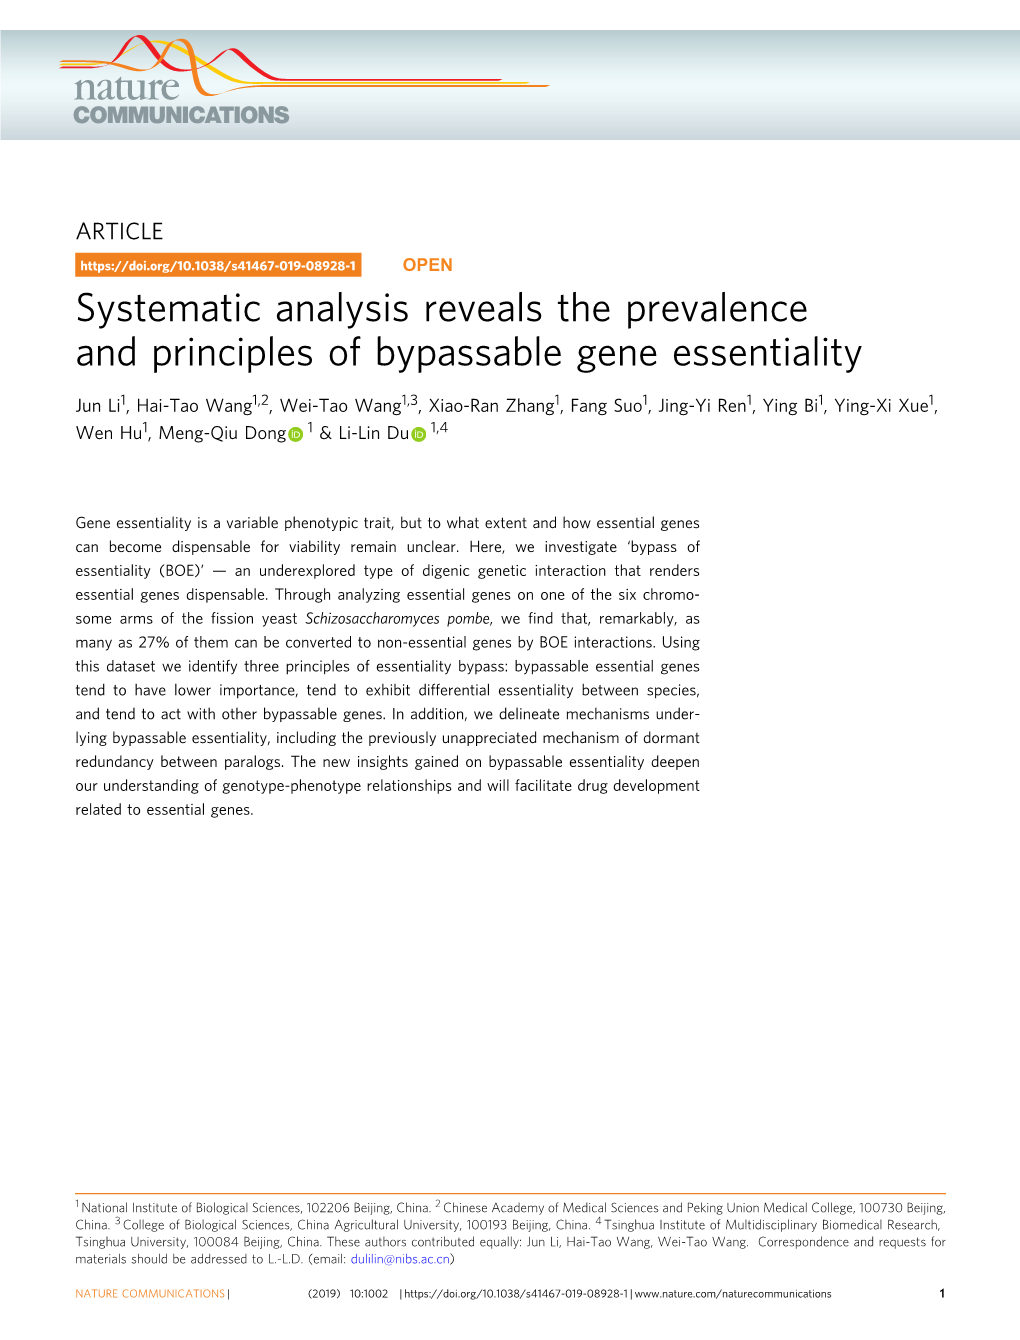 Systematic Analysis Reveals the Prevalence and Principles of Bypassable Gene Essentiality